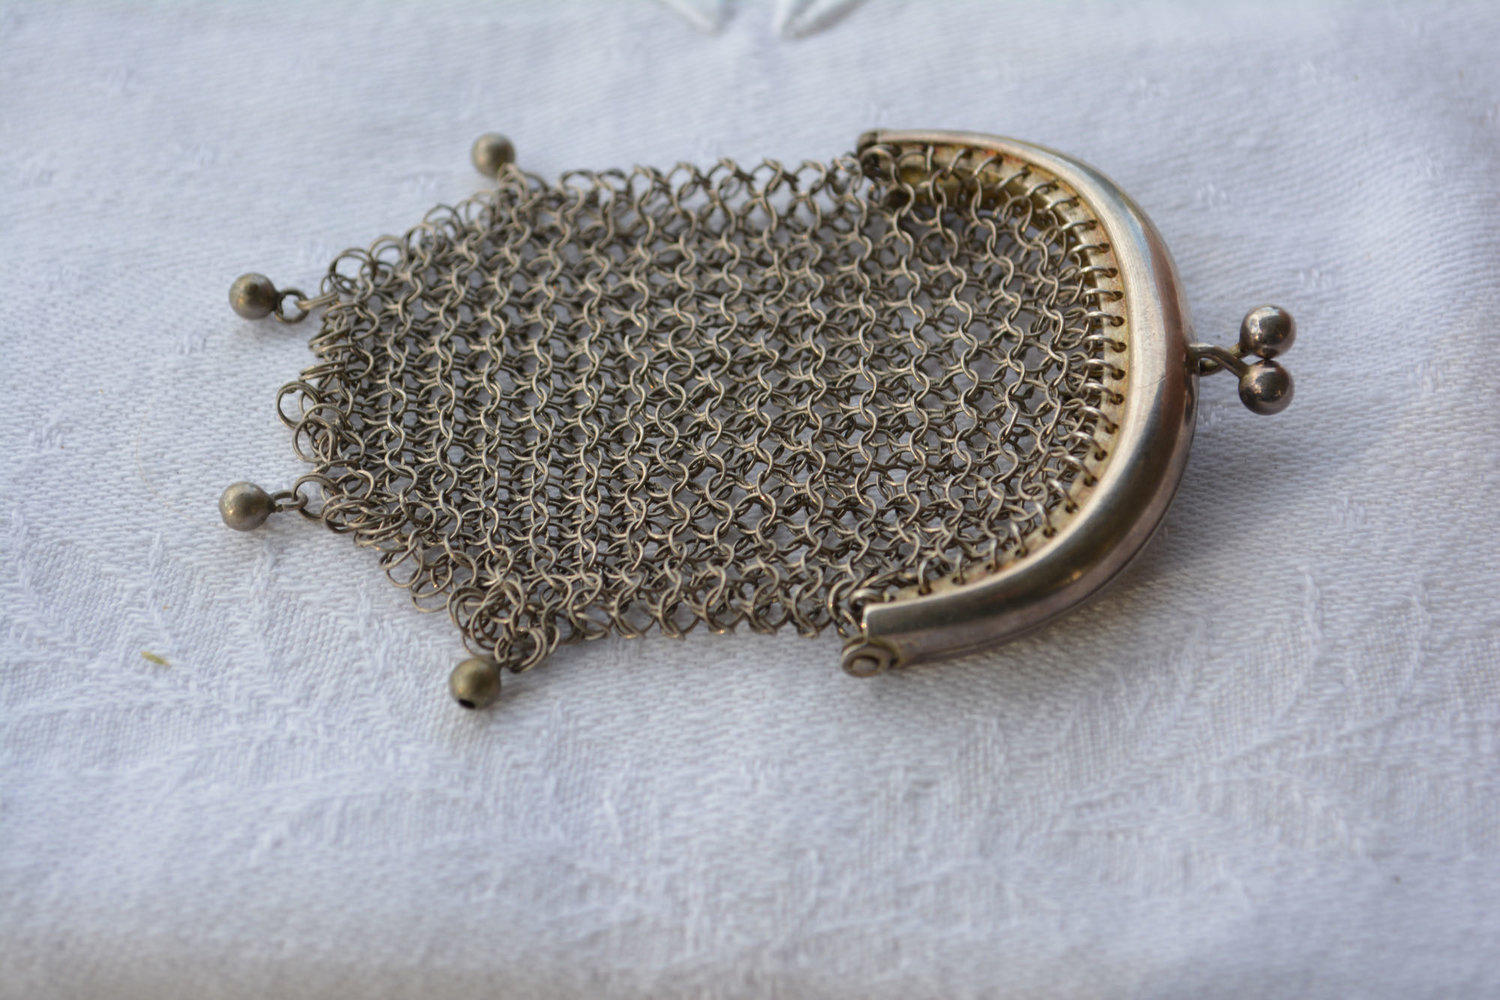 Antique Chainmail Purse Coin Ring Silver Plated French Edwardian Chatelaine 1920s 1910s